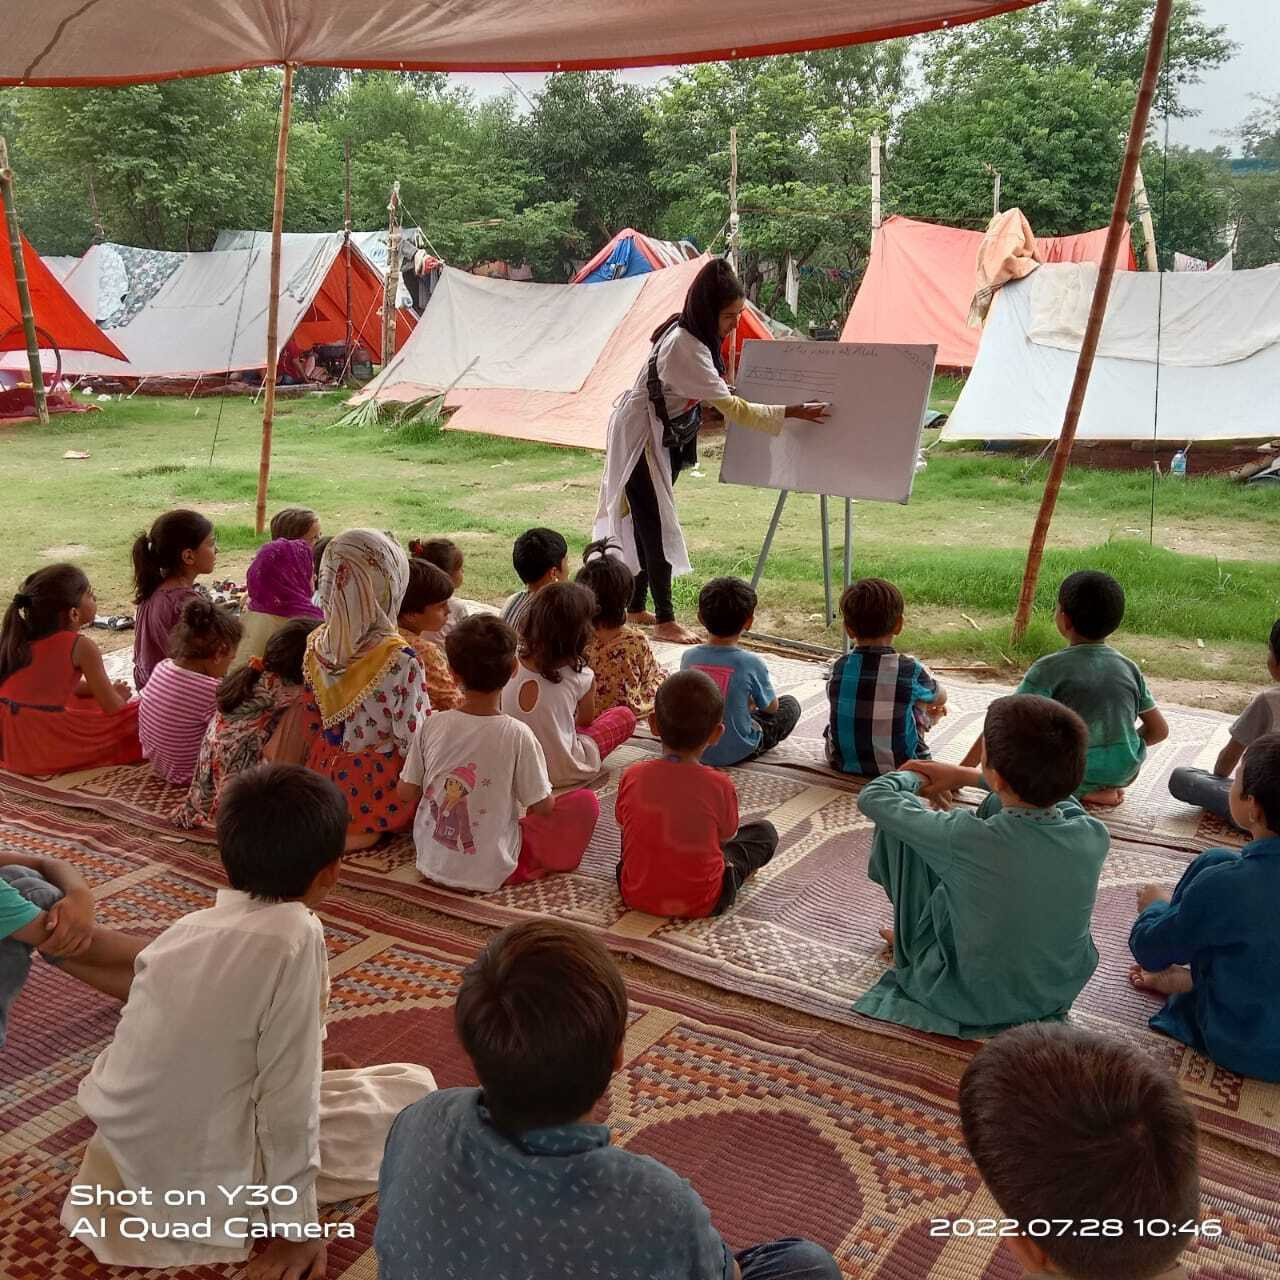 Diana teaching refugee kids in one of the tents